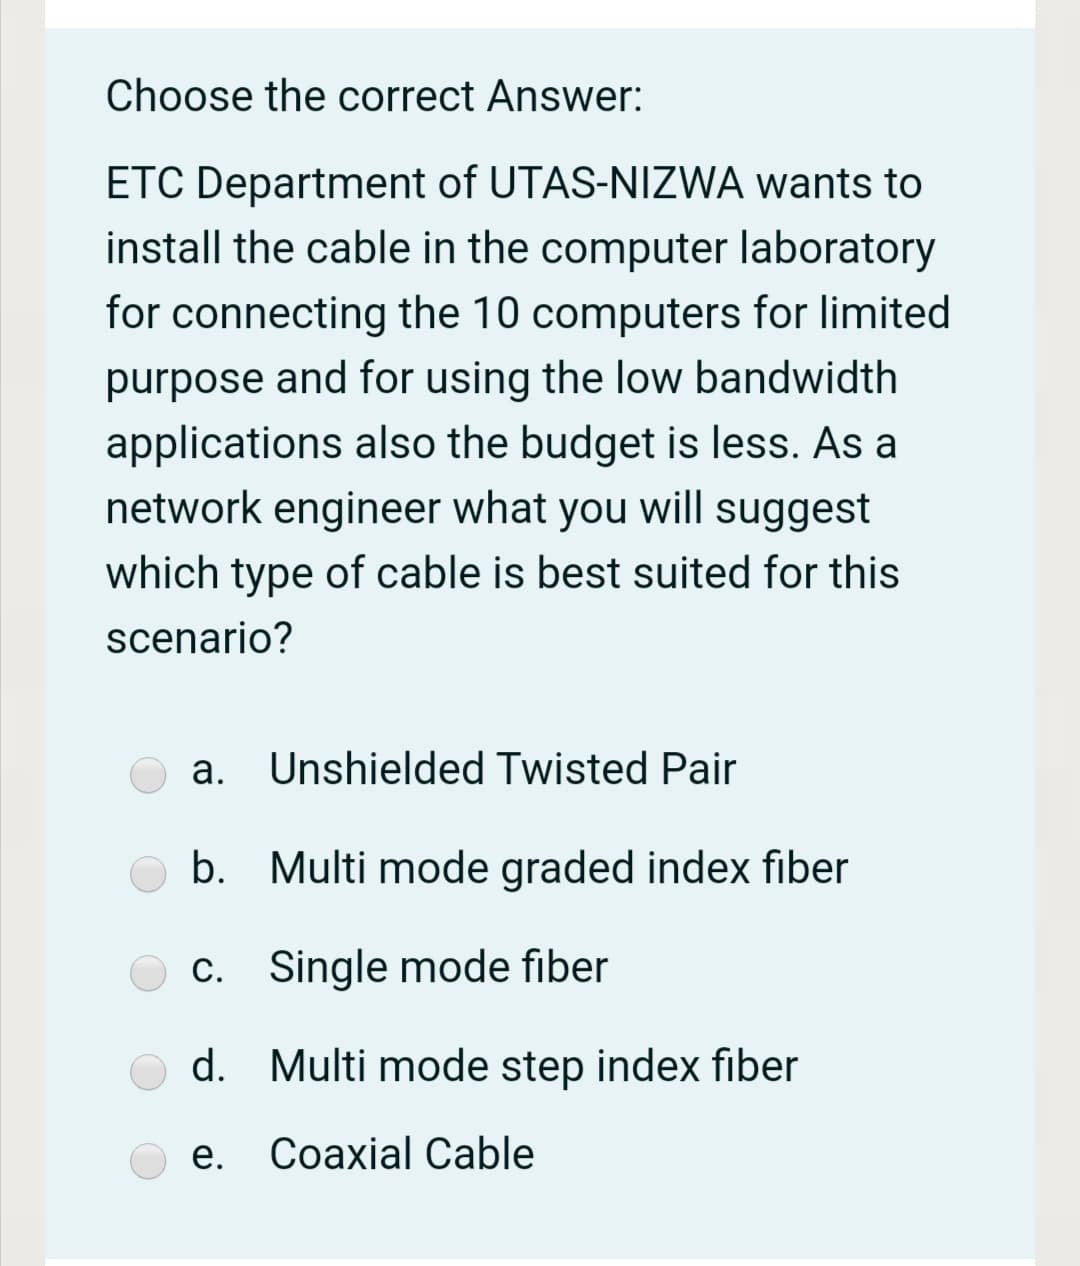 Choose the correct Answer:
ETC Department of UTAS-NIZWA wants to
install the cable in the computer laboratory
for connecting the 10 computers for limited
purpose and for using the low bandwidth
applications also the budget is less. As a
network engineer what you will suggest
which type of cable is best suited for this
scenario?
а.
Unshielded Twisted Pair
b. Multi mode graded index fiber
c. Single mode fiber
d.
Multi mode step index fiber
е.
Соaxial Cable
